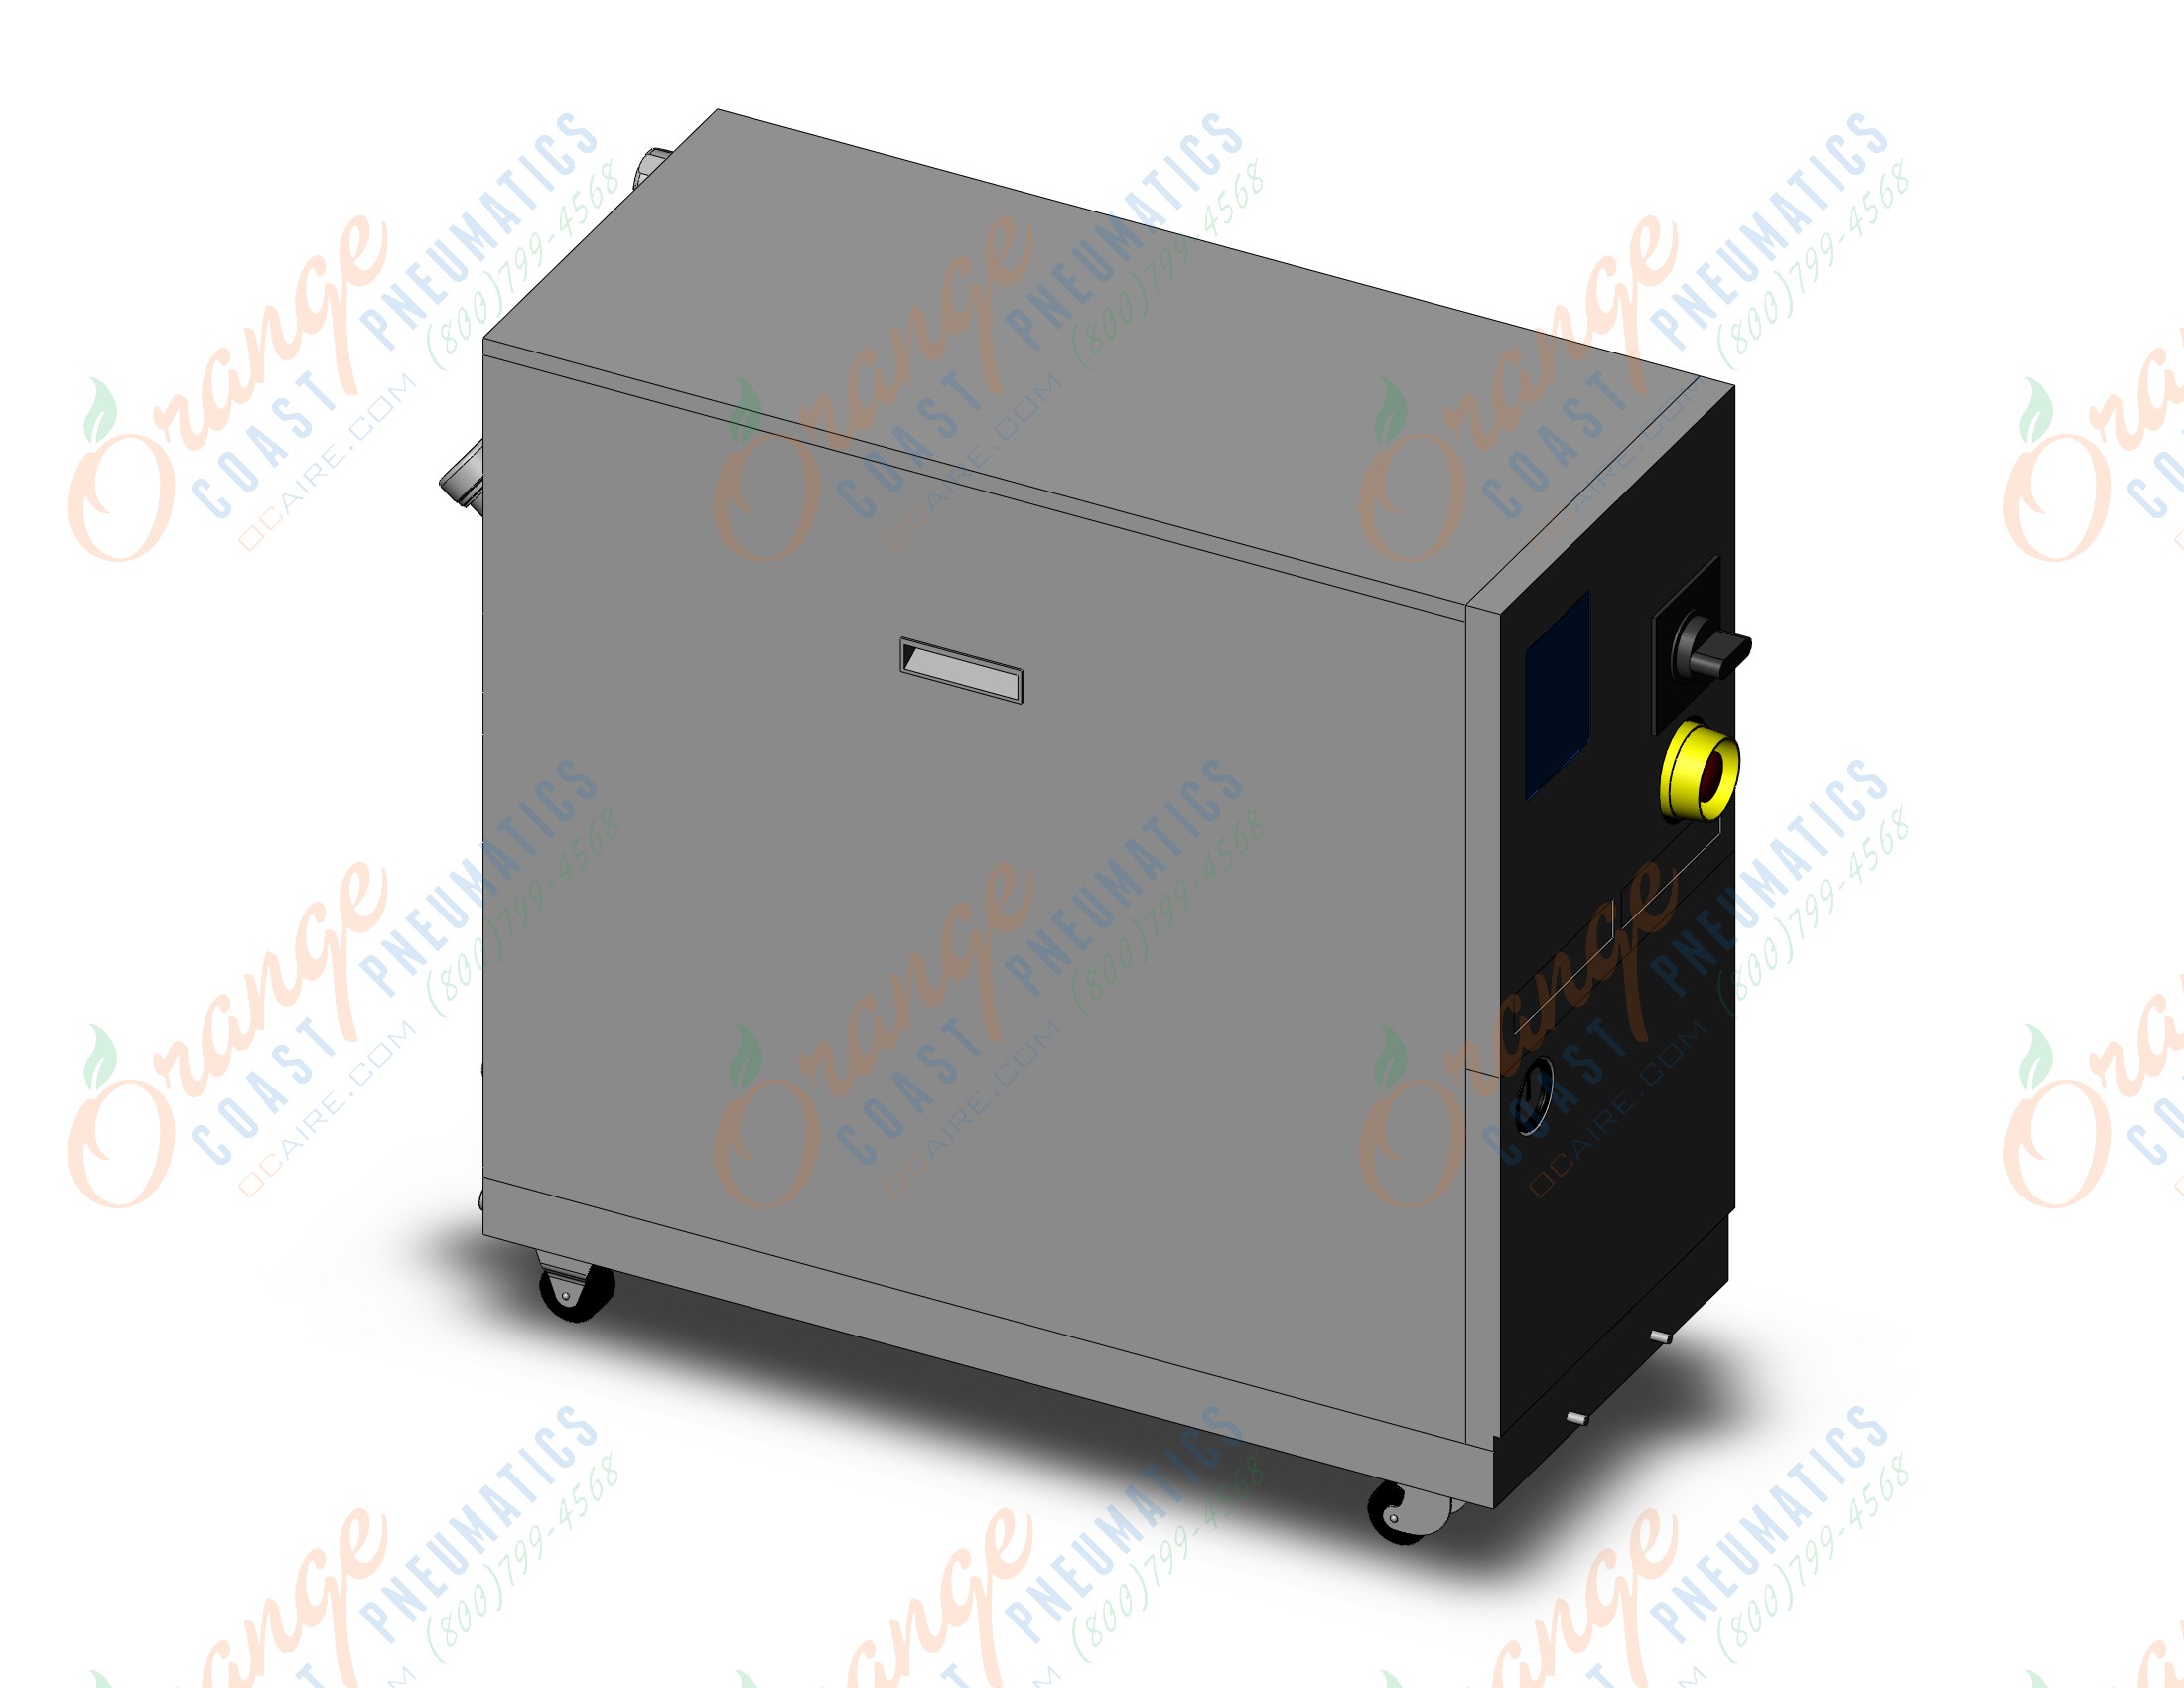 SMC HRZ004-H1-CN thermo chiller, REFRIGERATED THERMO-COOLER